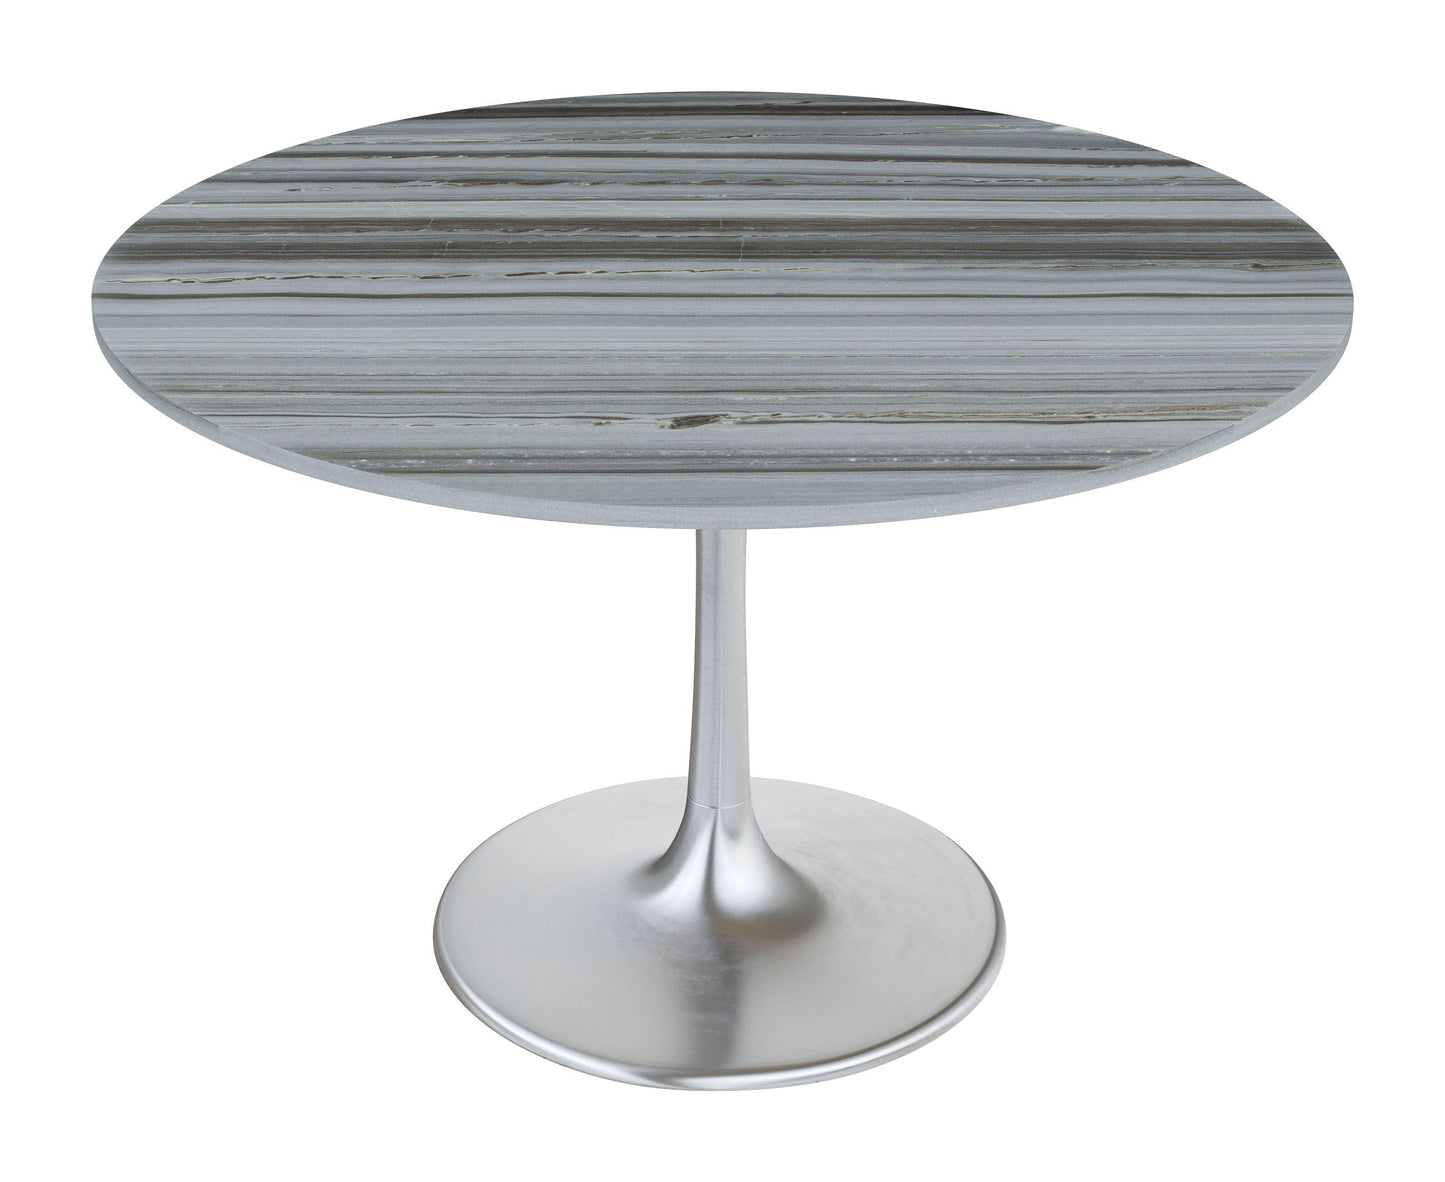 Star City Dining Table 48" Gray - Sideboards and Things Brand_Zuo Modern, Color_Gray, Color_Silver, Finish_Semi Gloss, Height_20-30, Materials_Metal, Materials_Stone, Materials_Wood, Metal Type_Aluminum, Metal Type_Iron, Product Type_Dining Height, Seating Capacity_4, Seating Capacity_6, Shape_Round, Stone Type_Marble, Table Base_Metal, Table Top_Stone, Width_40-50, Wood Species_MDF